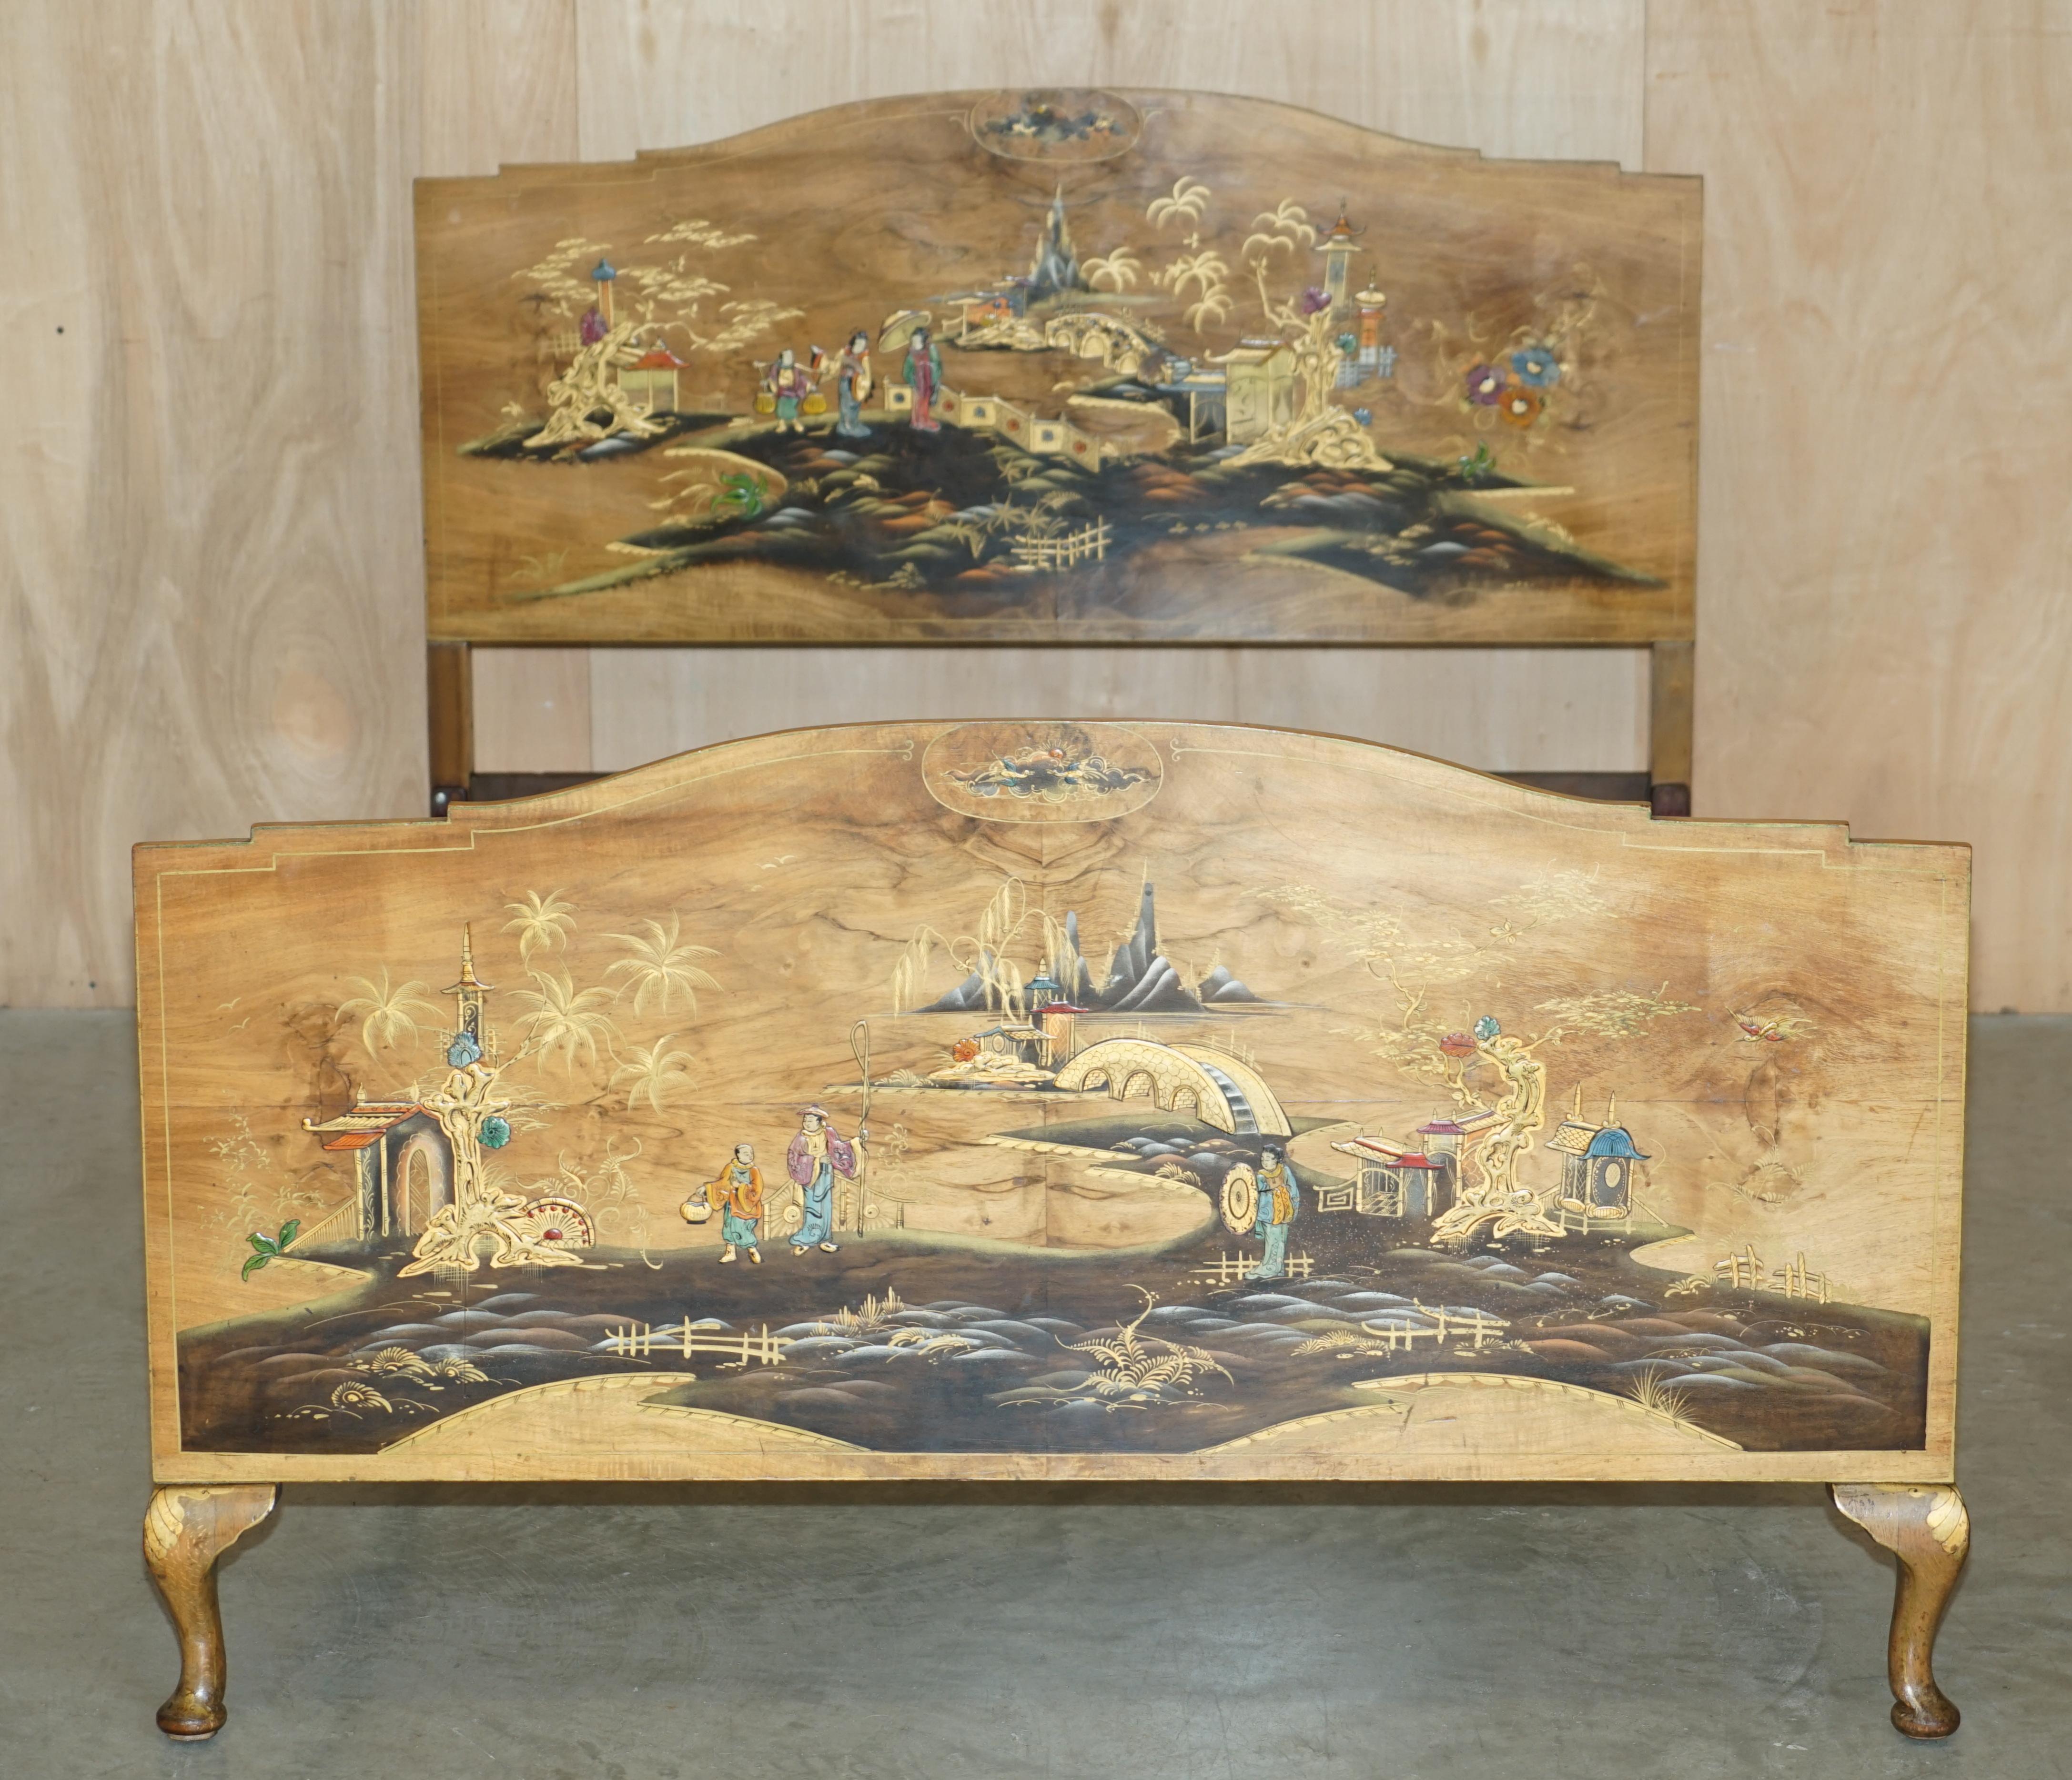 Royal House Antiques

Royal House Antiques is delighted to offer for sale this stunning Circa 1920, super rare and collectable, bleached Walnut, Chinese Chinoiserie bedstead frame with AFB rails which is part of a suite

Please note the delivery fee